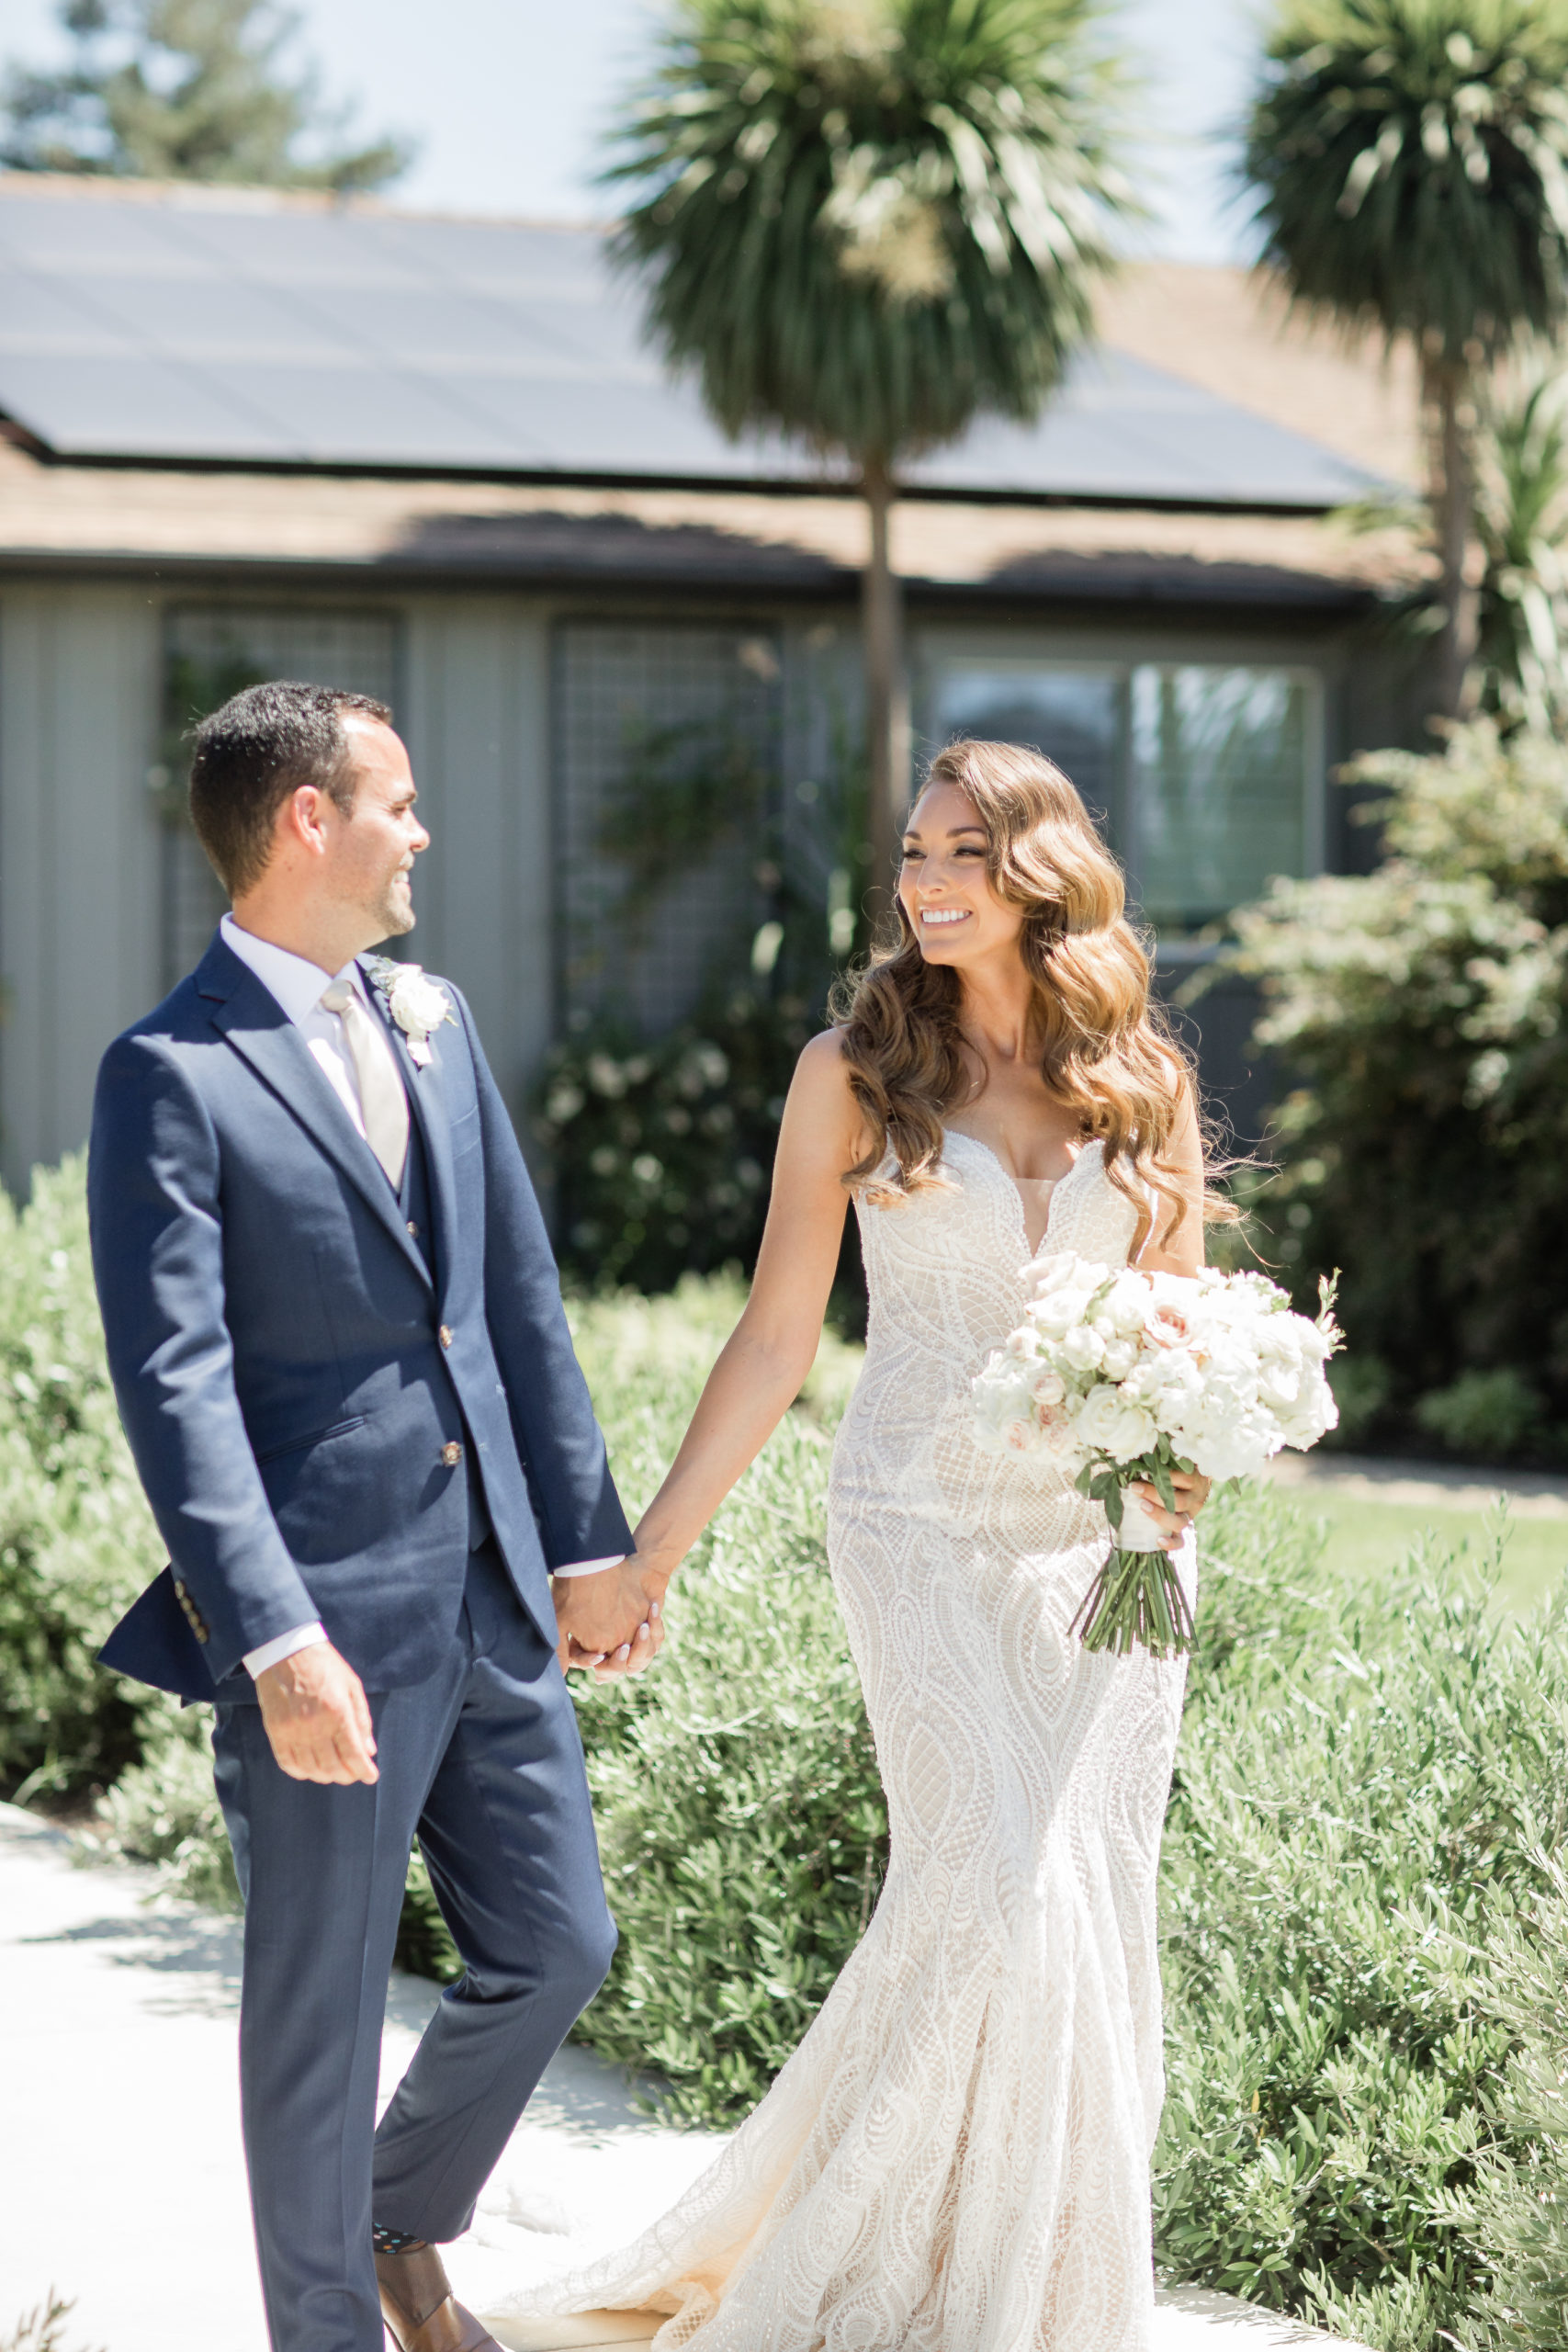 Tara and John in wedding attire, looking at each other and smiling as they walk down a concrete path with a house and two palm trees in the background.